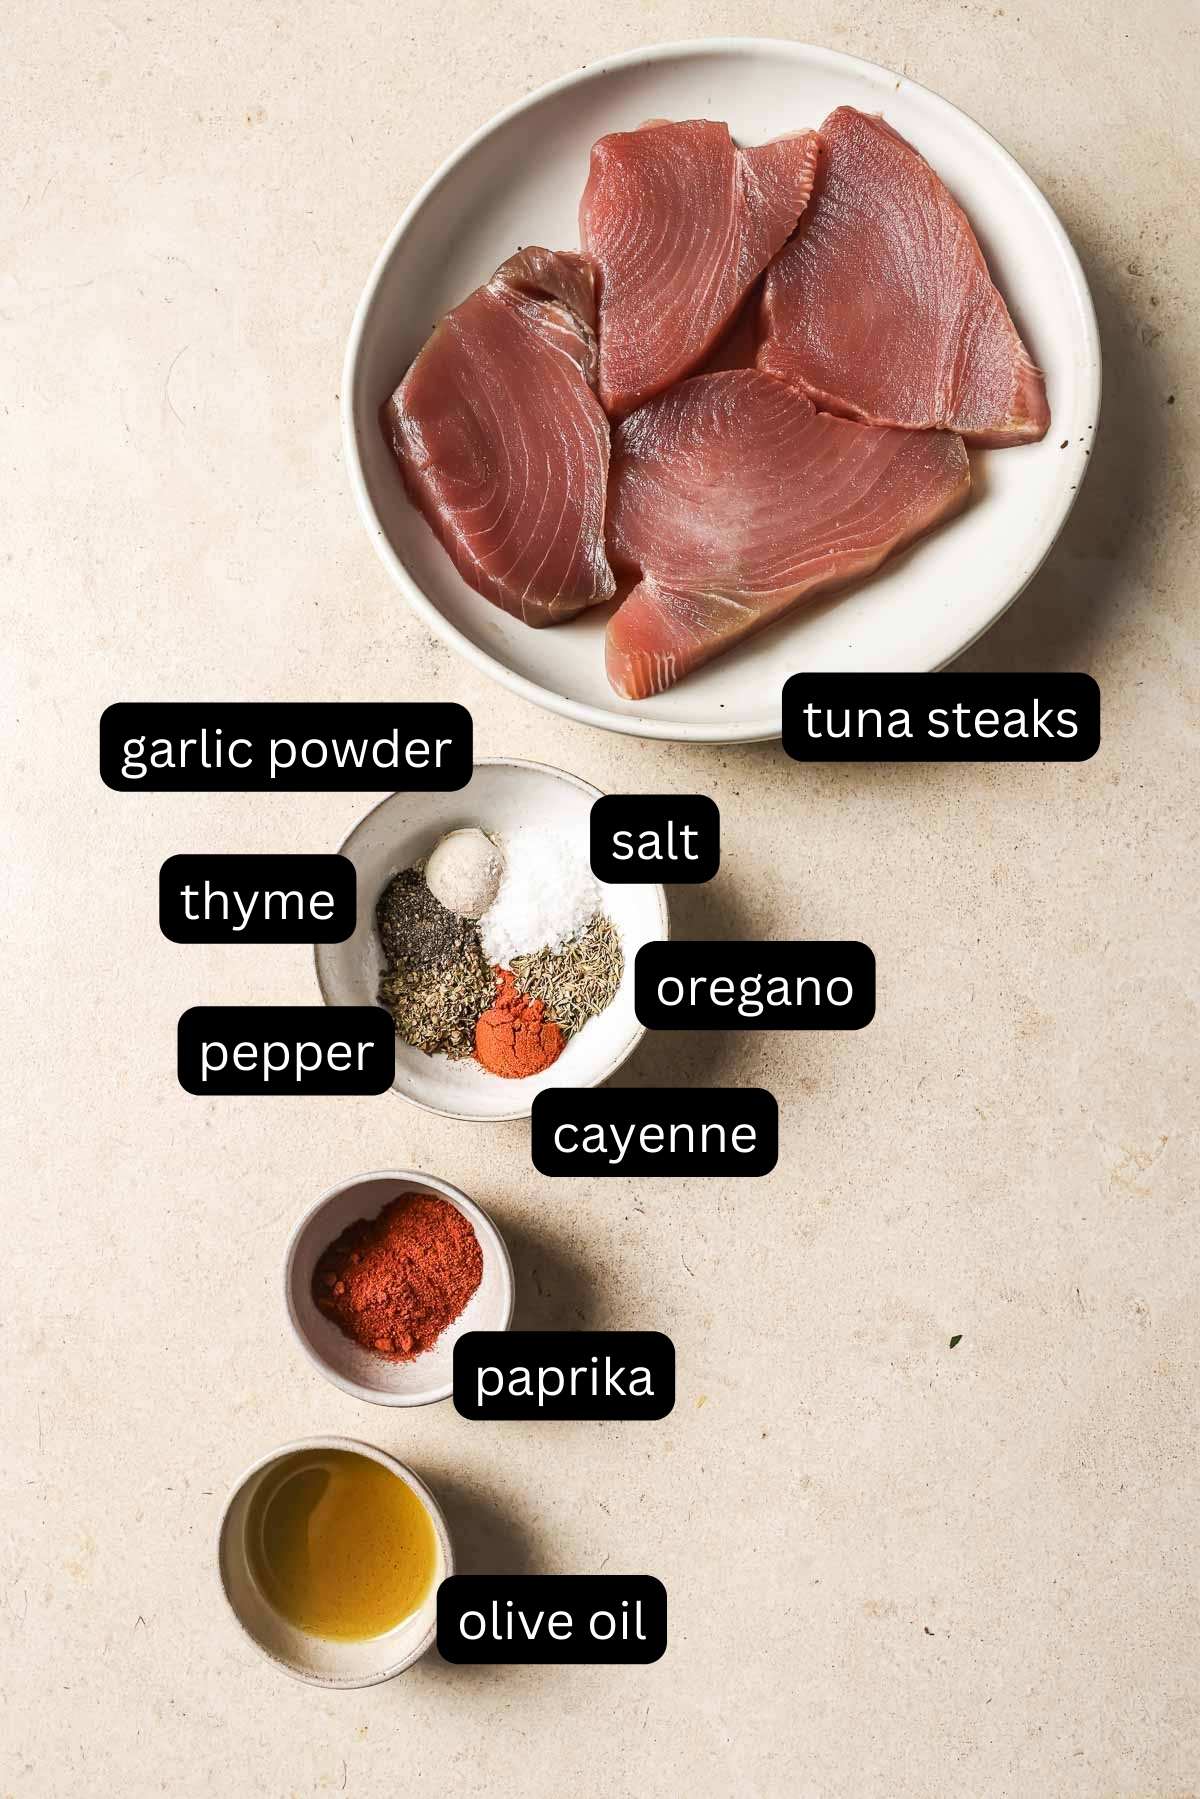 The ingredients for a recipe for blackened tuna steaks.